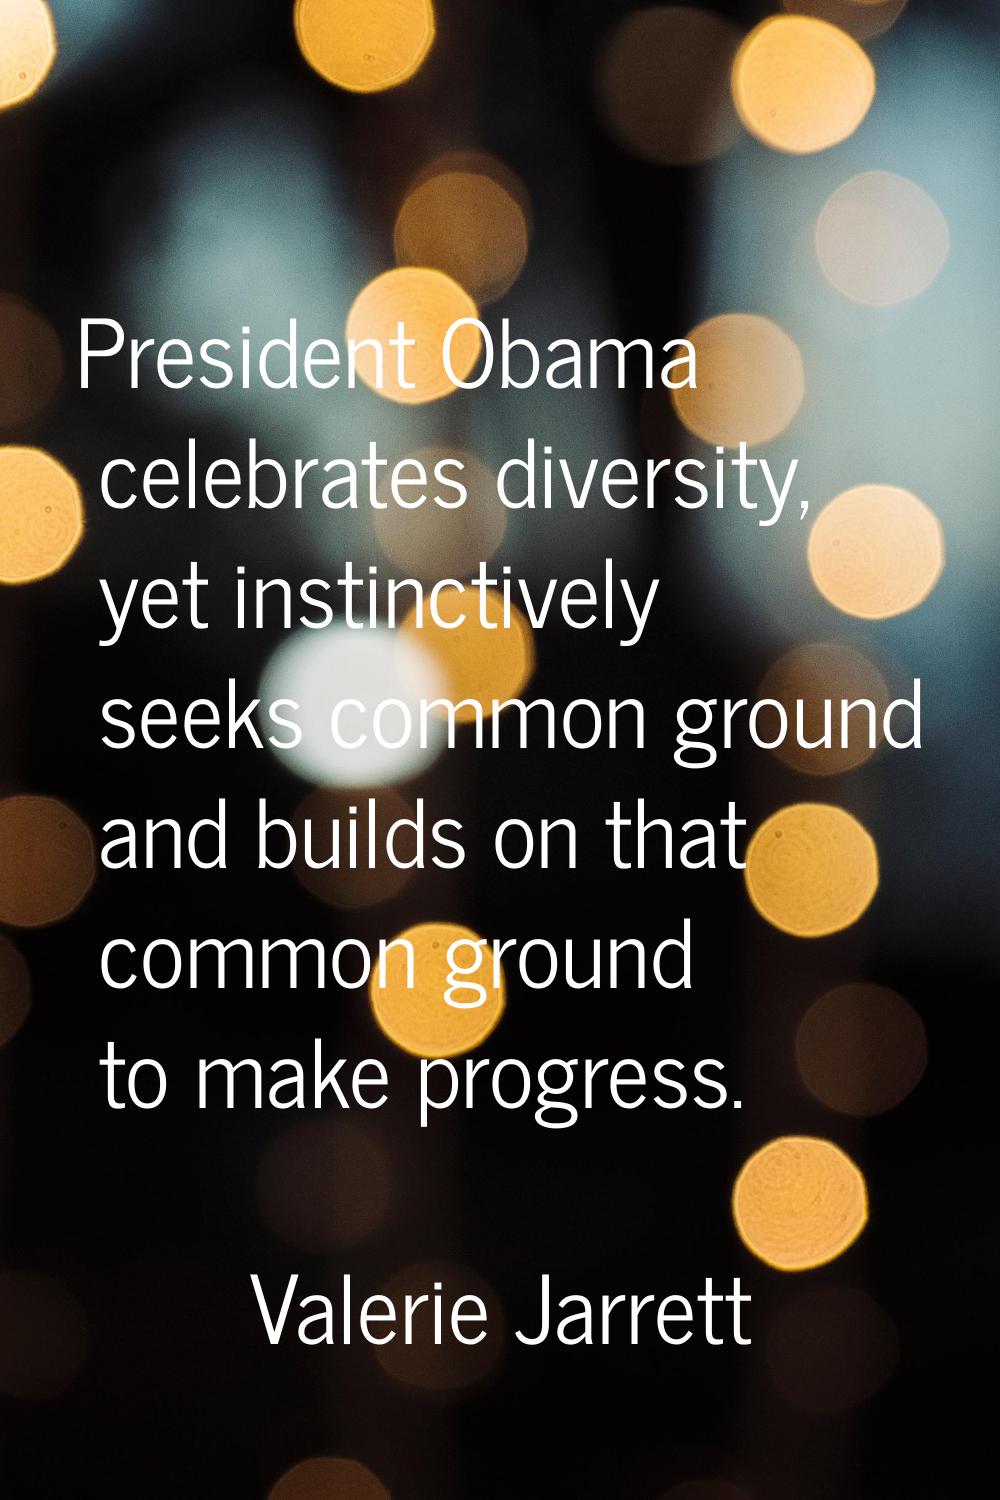 President Obama celebrates diversity, yet instinctively seeks common ground and builds on that comm